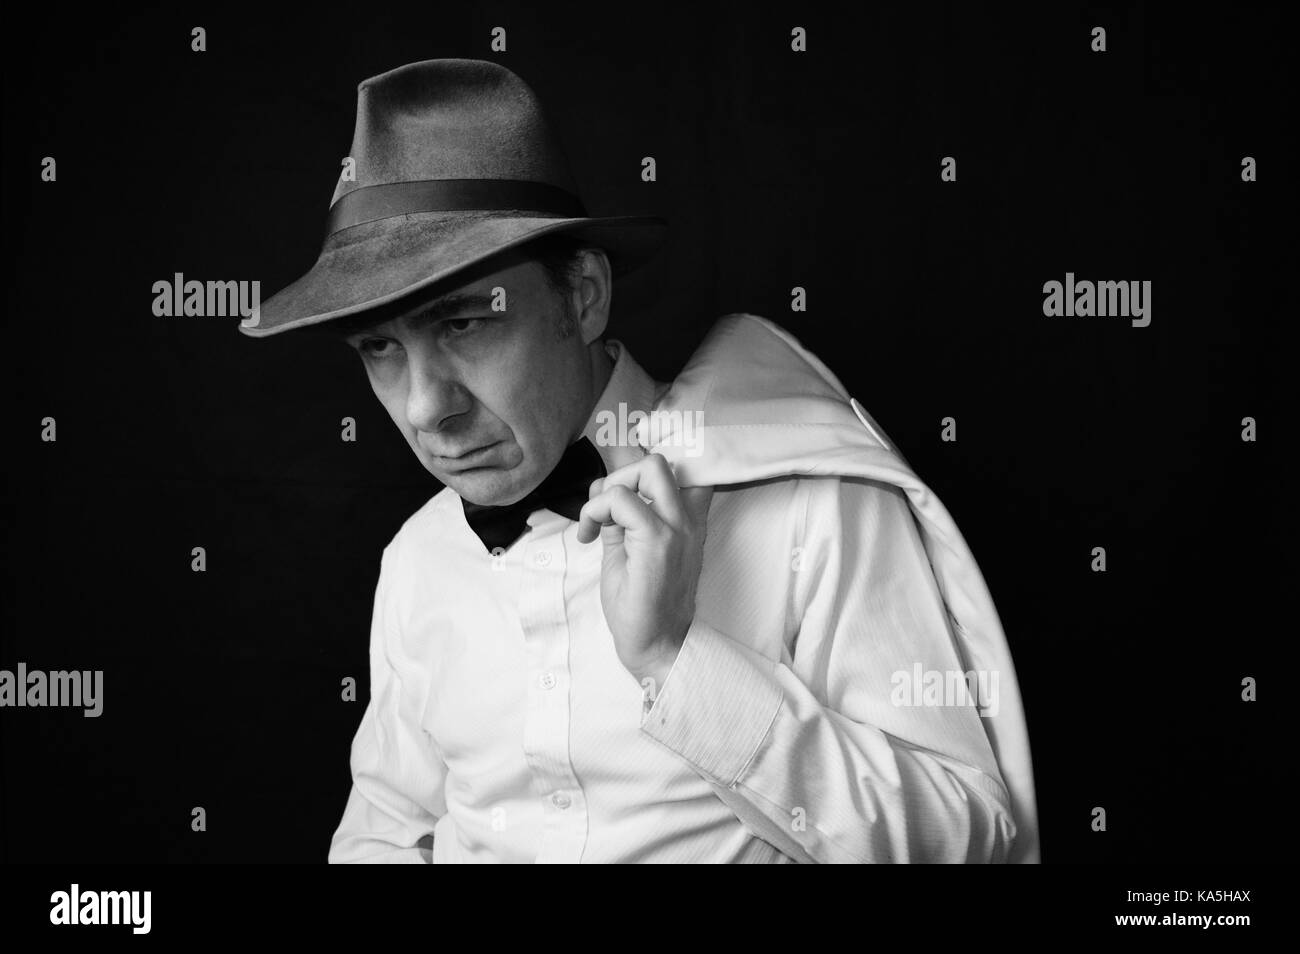 1940s Detective High Resolution Stock Photography and Images - Alamy